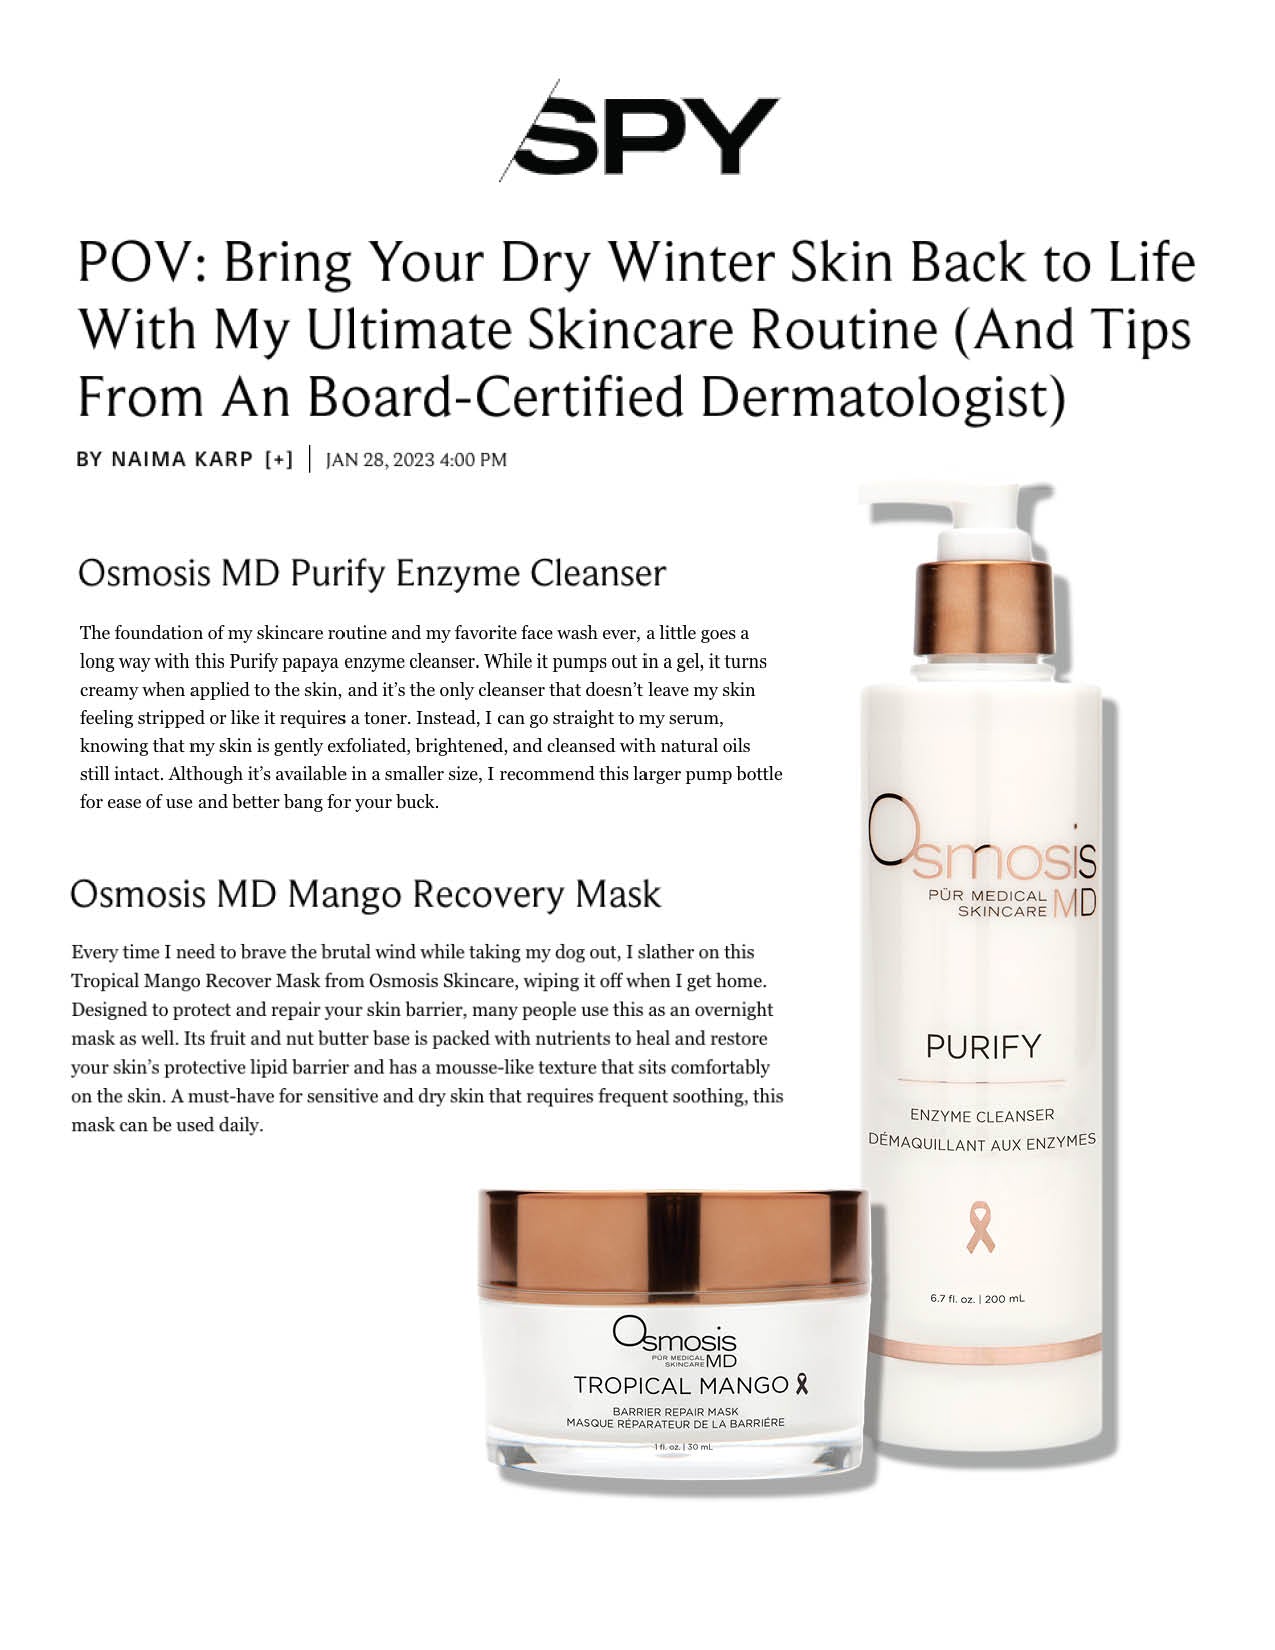 Purify and Tropical Mango featured in Spy.com in a story titled POV: Bring Your Dry Winter Skin Back to Life With My Ultimate Skincare Routine (And Tips From An Board-Certified Dermatologist)